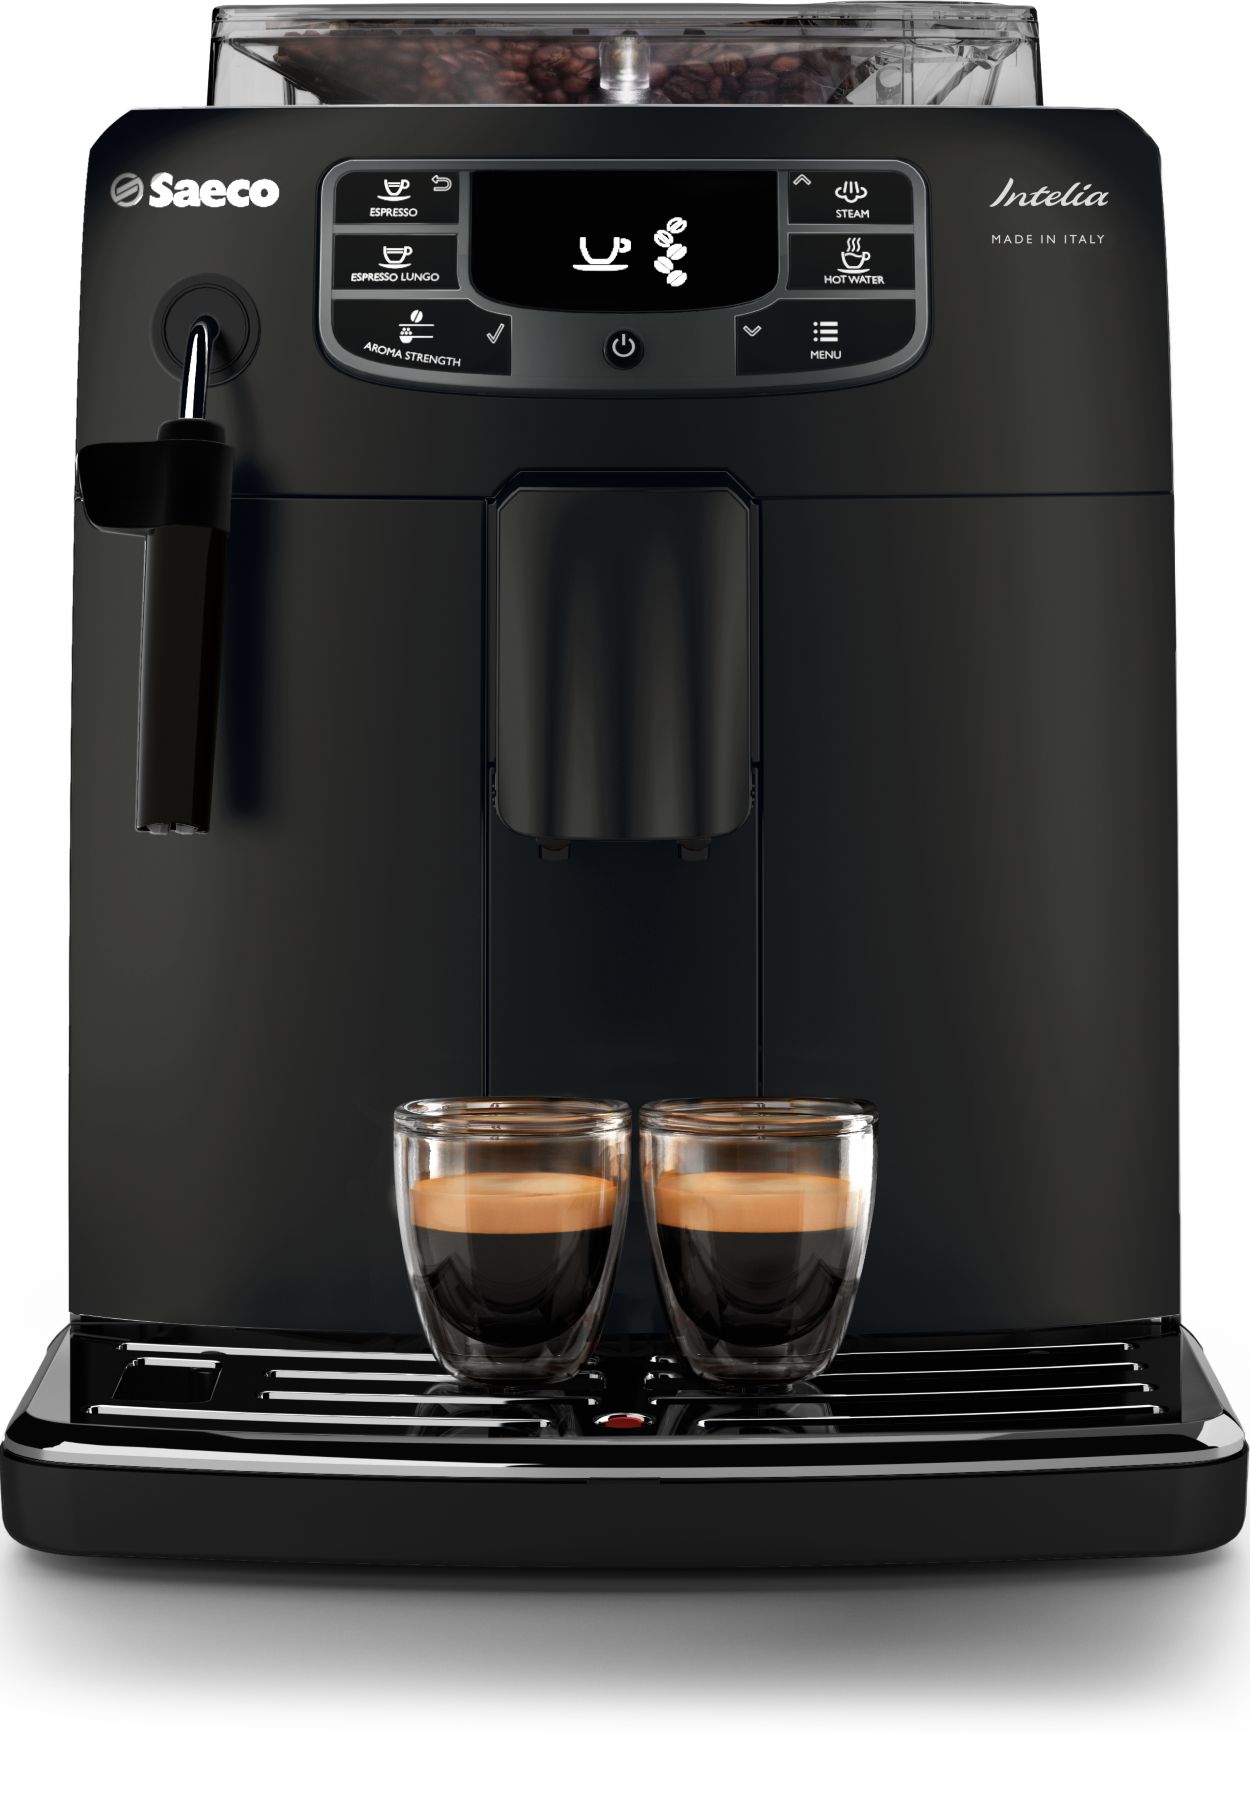 Philips Saeco Hd8900/01 Cafetera Expreso Deluxe Superautomat